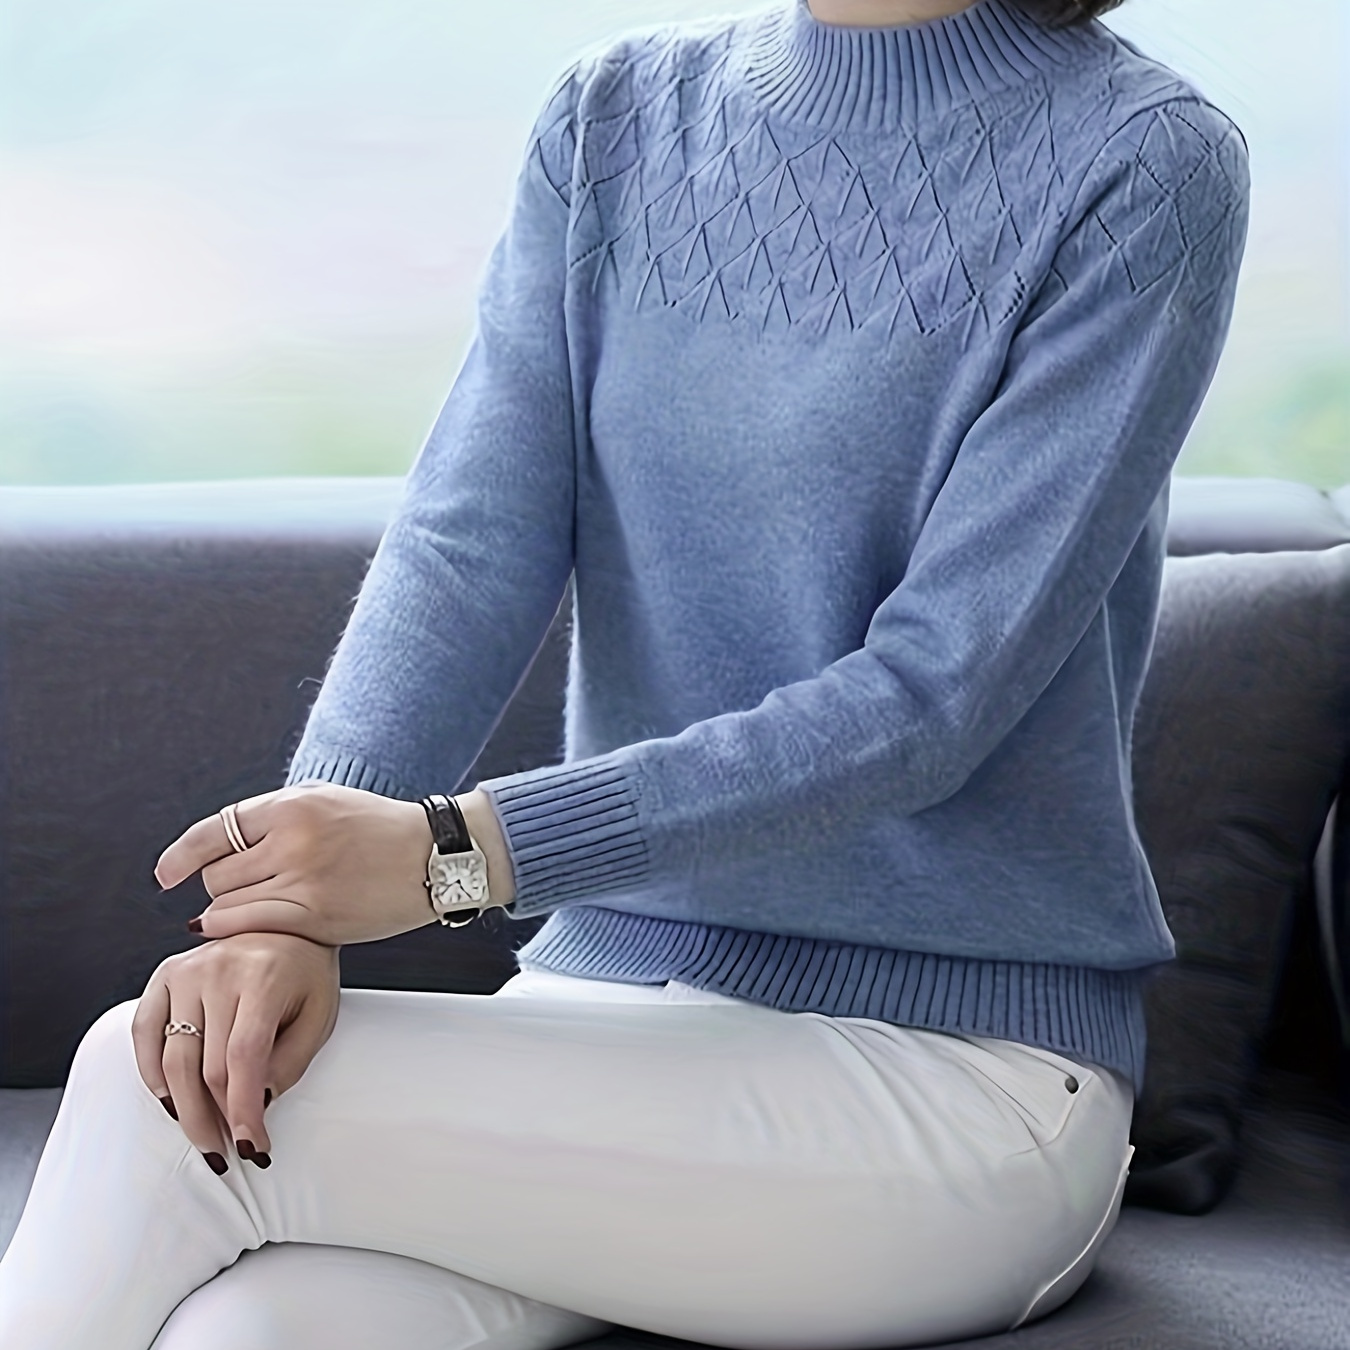 

Long Sleeve Mock Neck Sweater, Elegant Casual Sweater For Fall & Spring, Women's Clothing